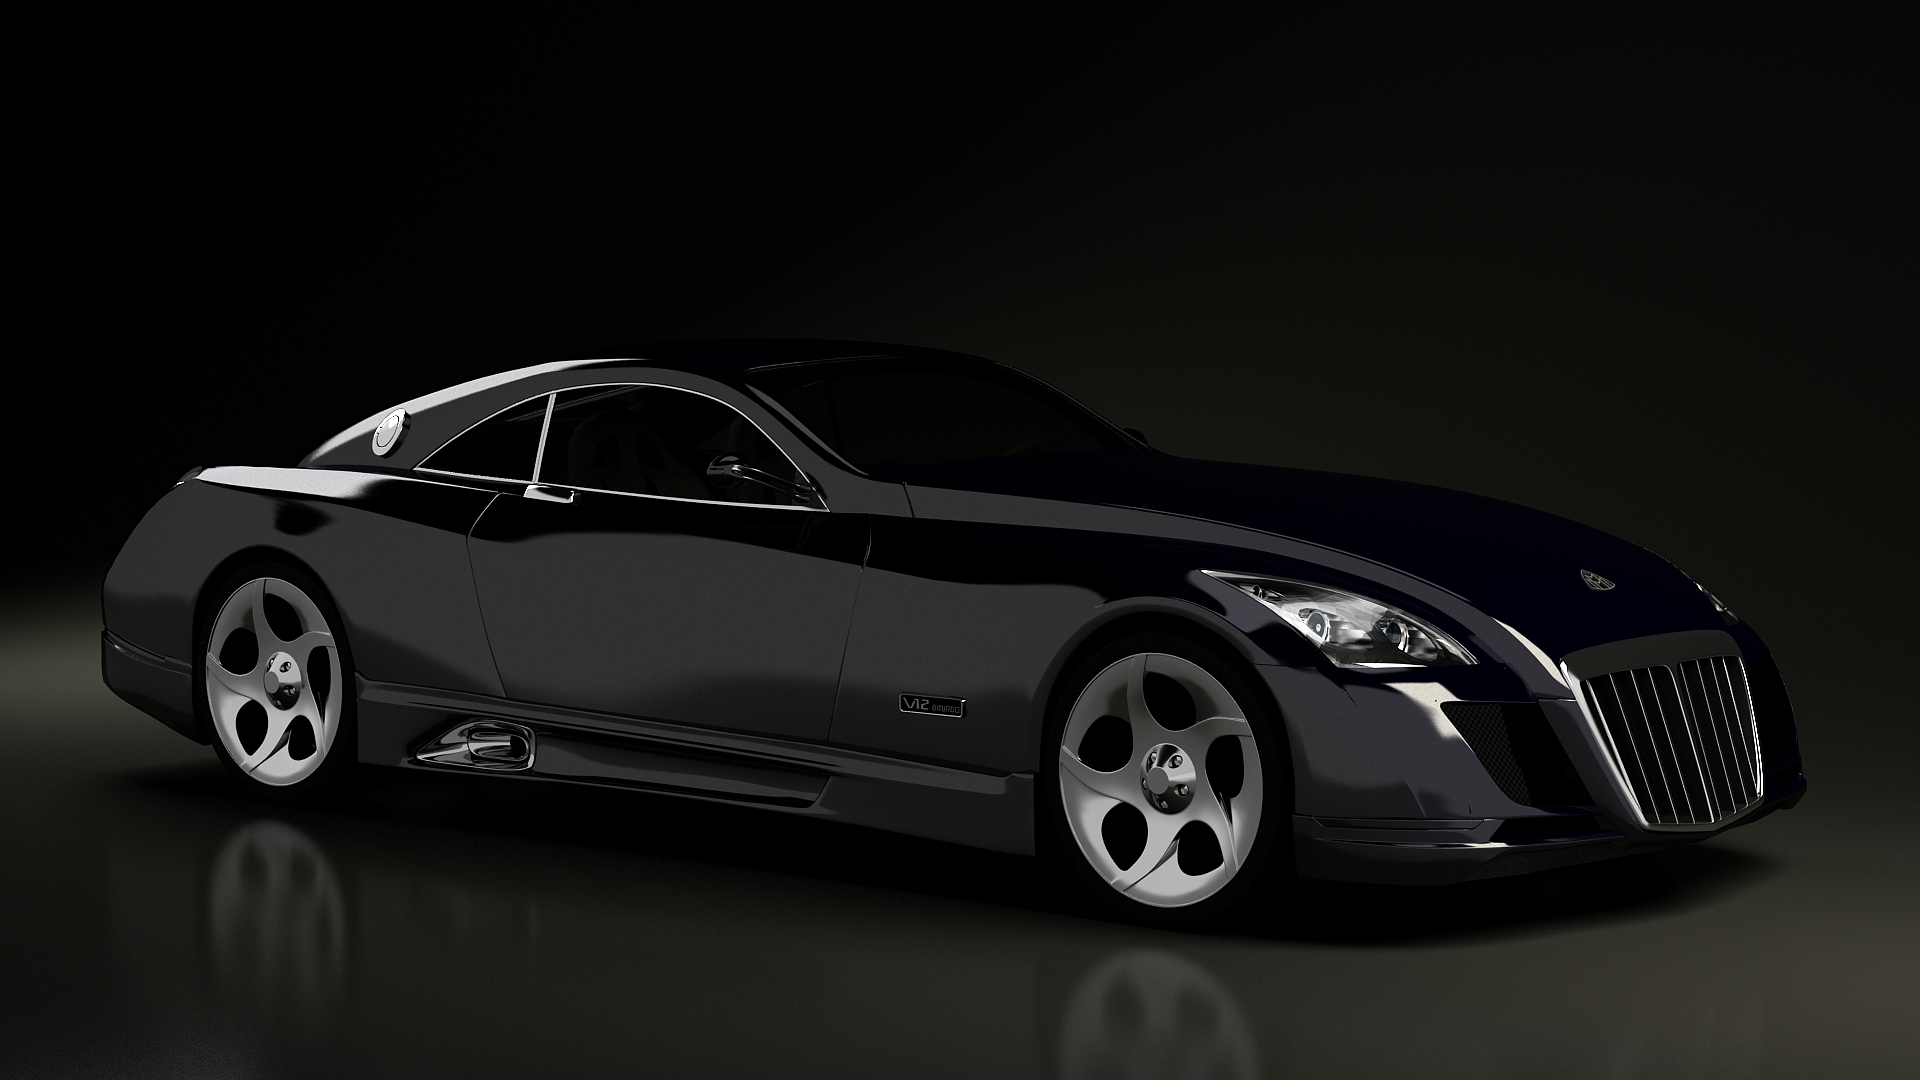 Images of Maybach Exelero | 1920x1080